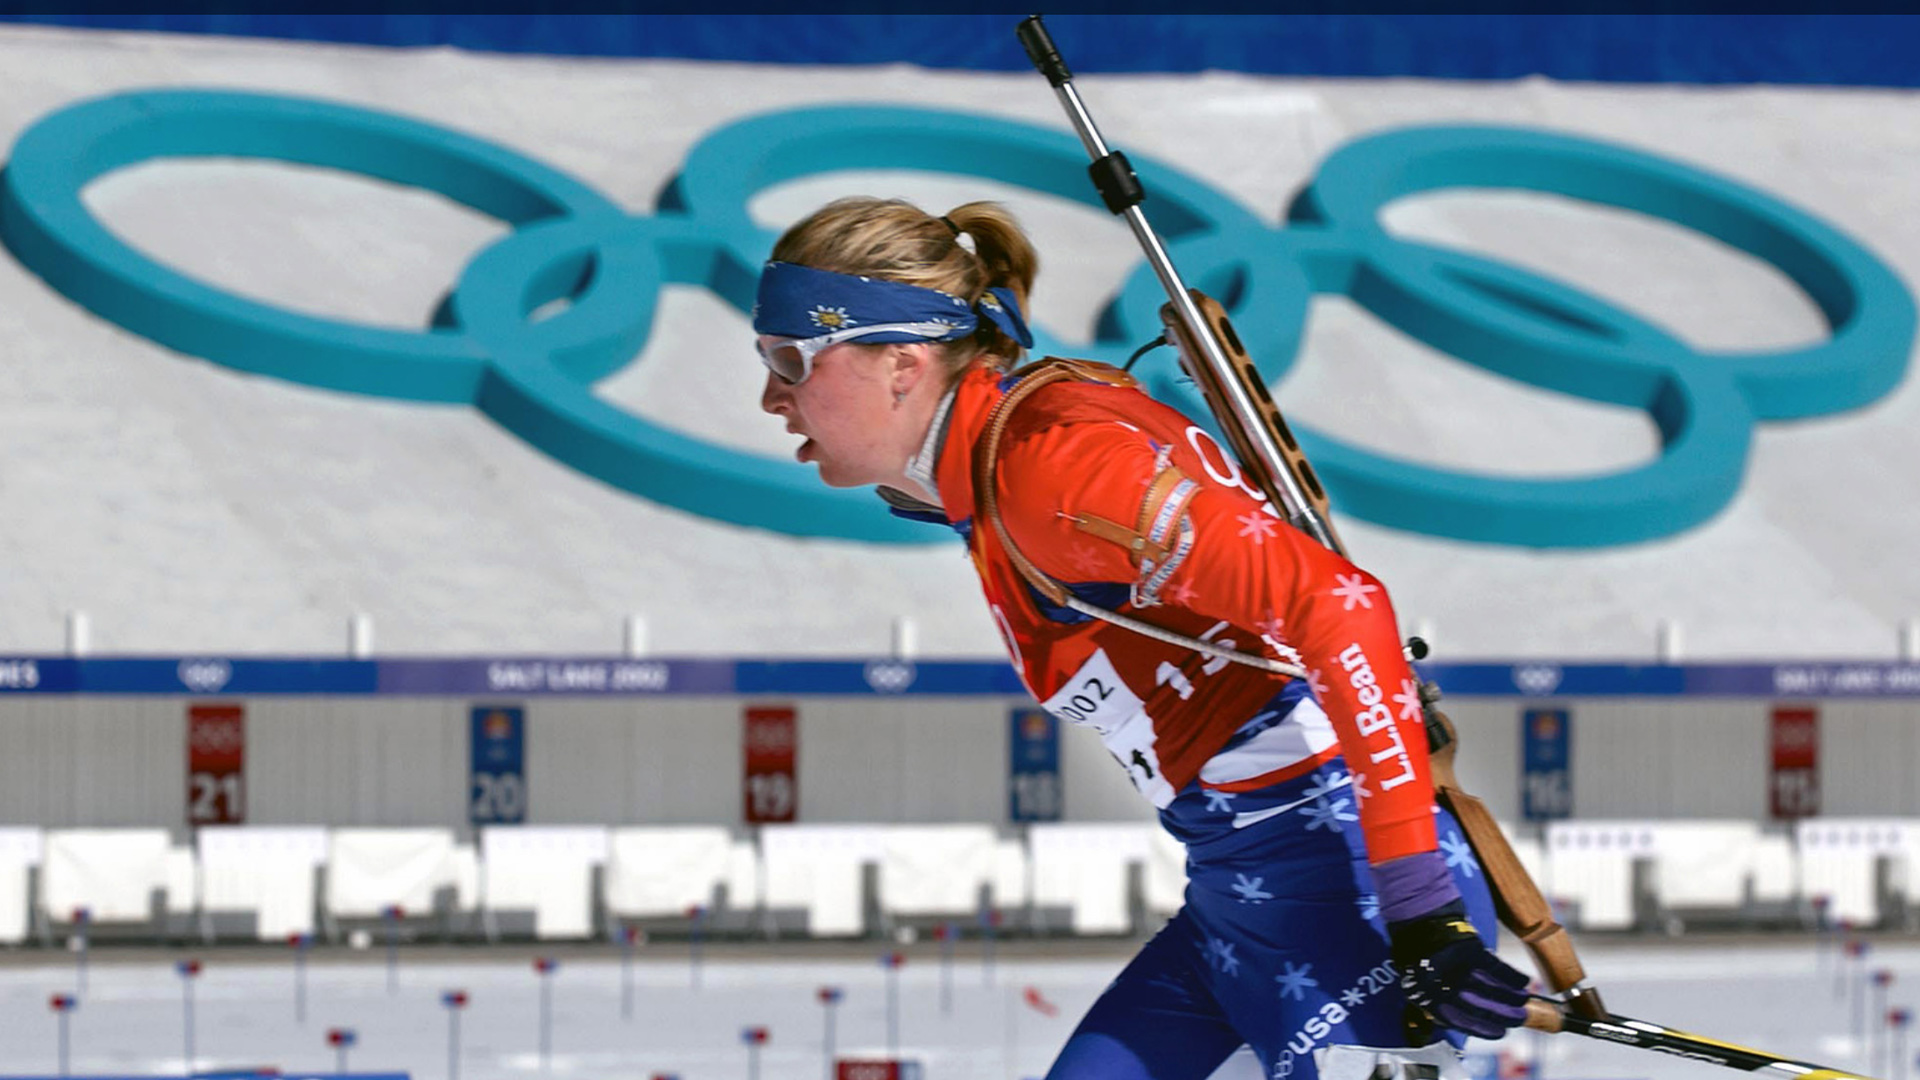 How To Watch Beijing Winter Olympics Biathlon Events An NRA Shooting Sports Journal